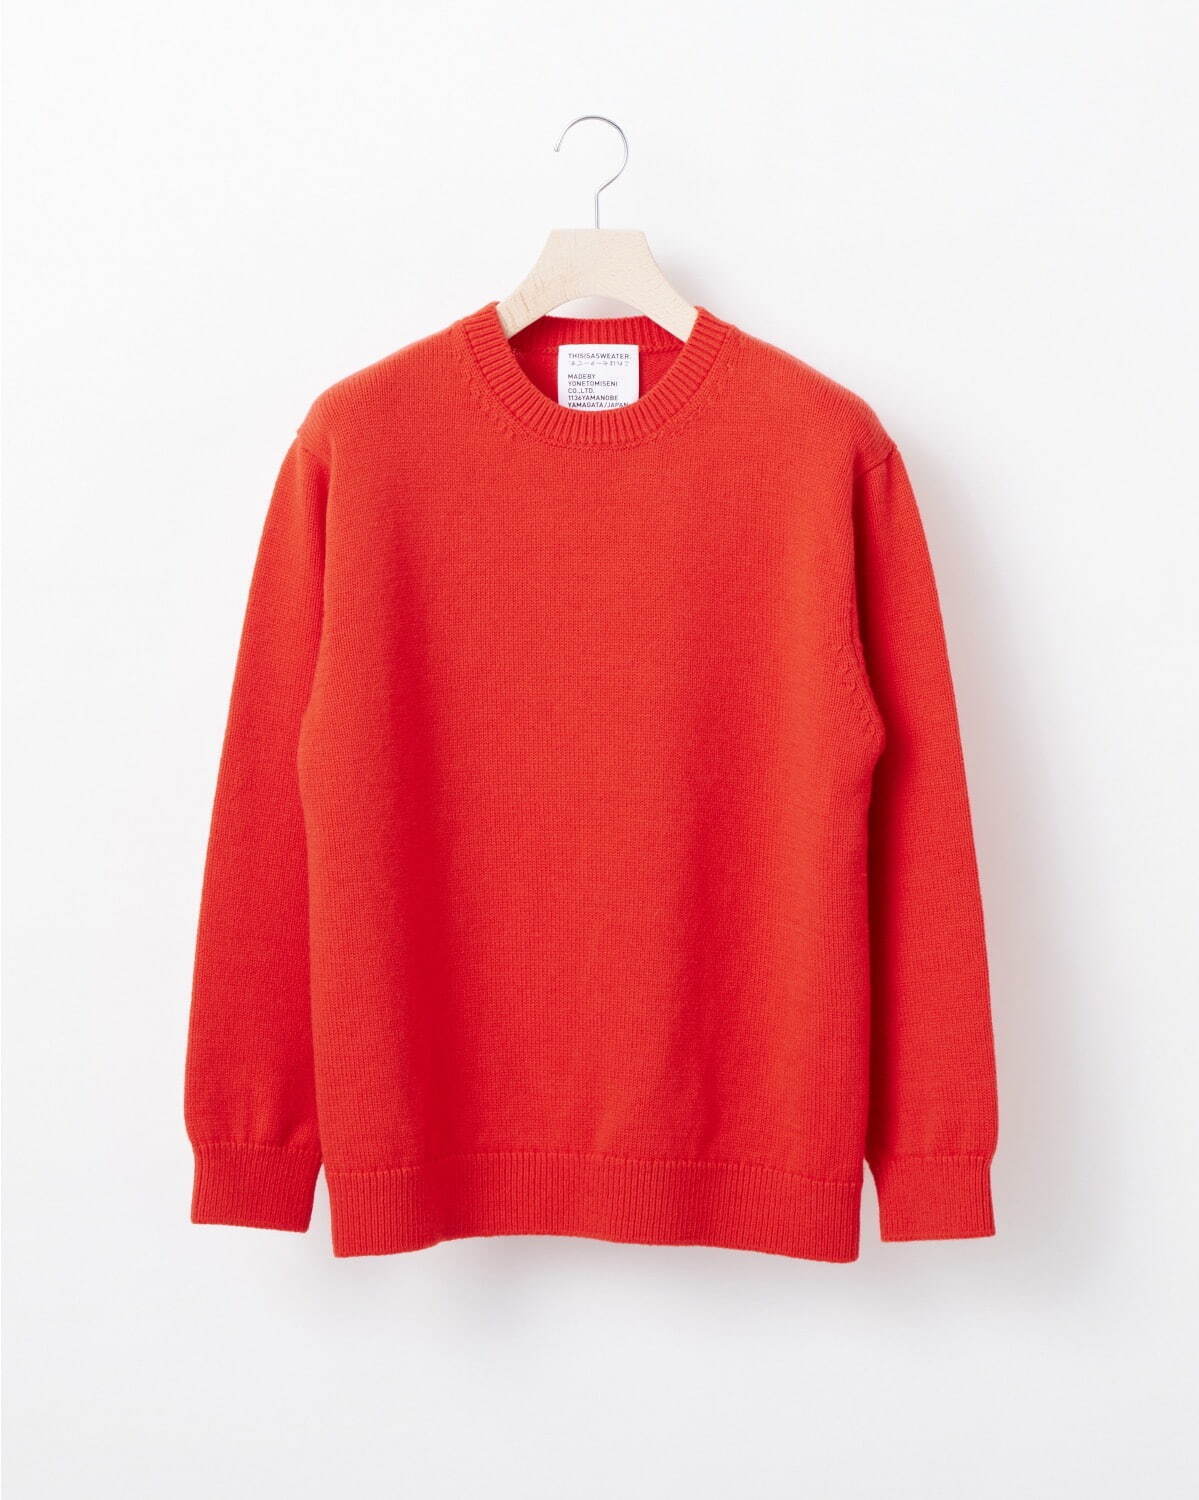 A1 : A SWEATER IS ORDINARY. 28,600円